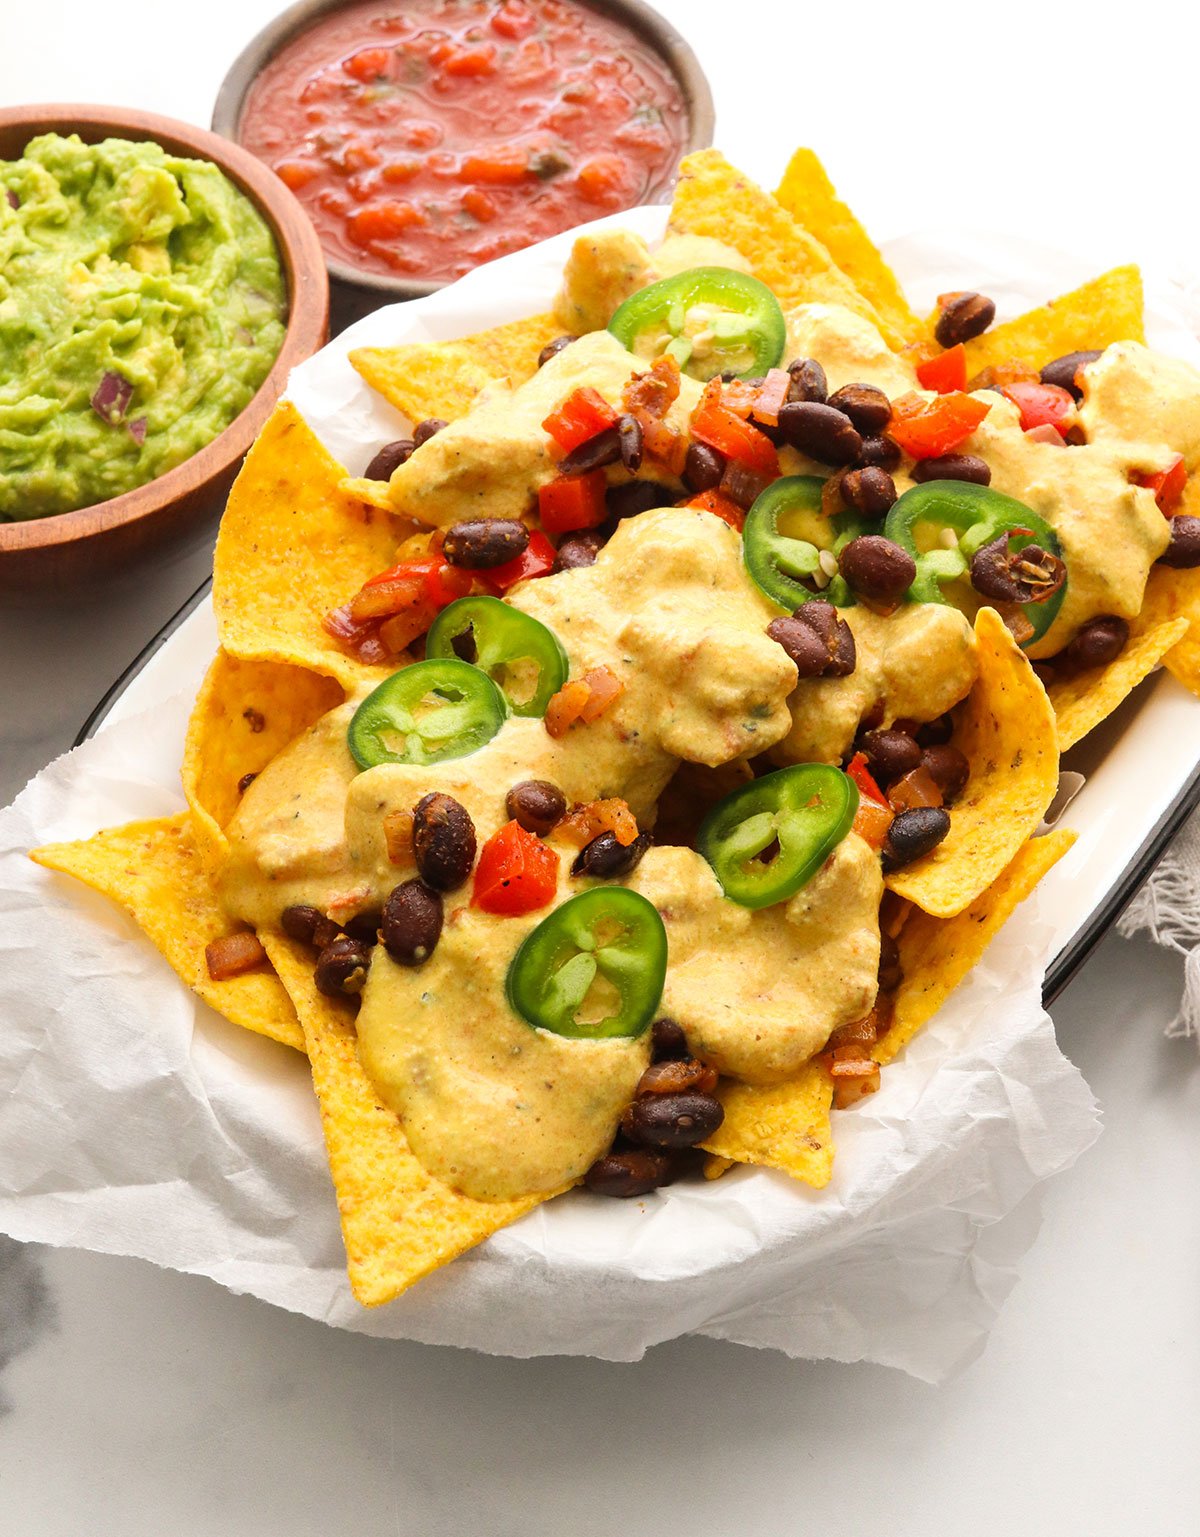 tortilla chips loaded with vegan nacho toppings and a side of guacamole and salsa.